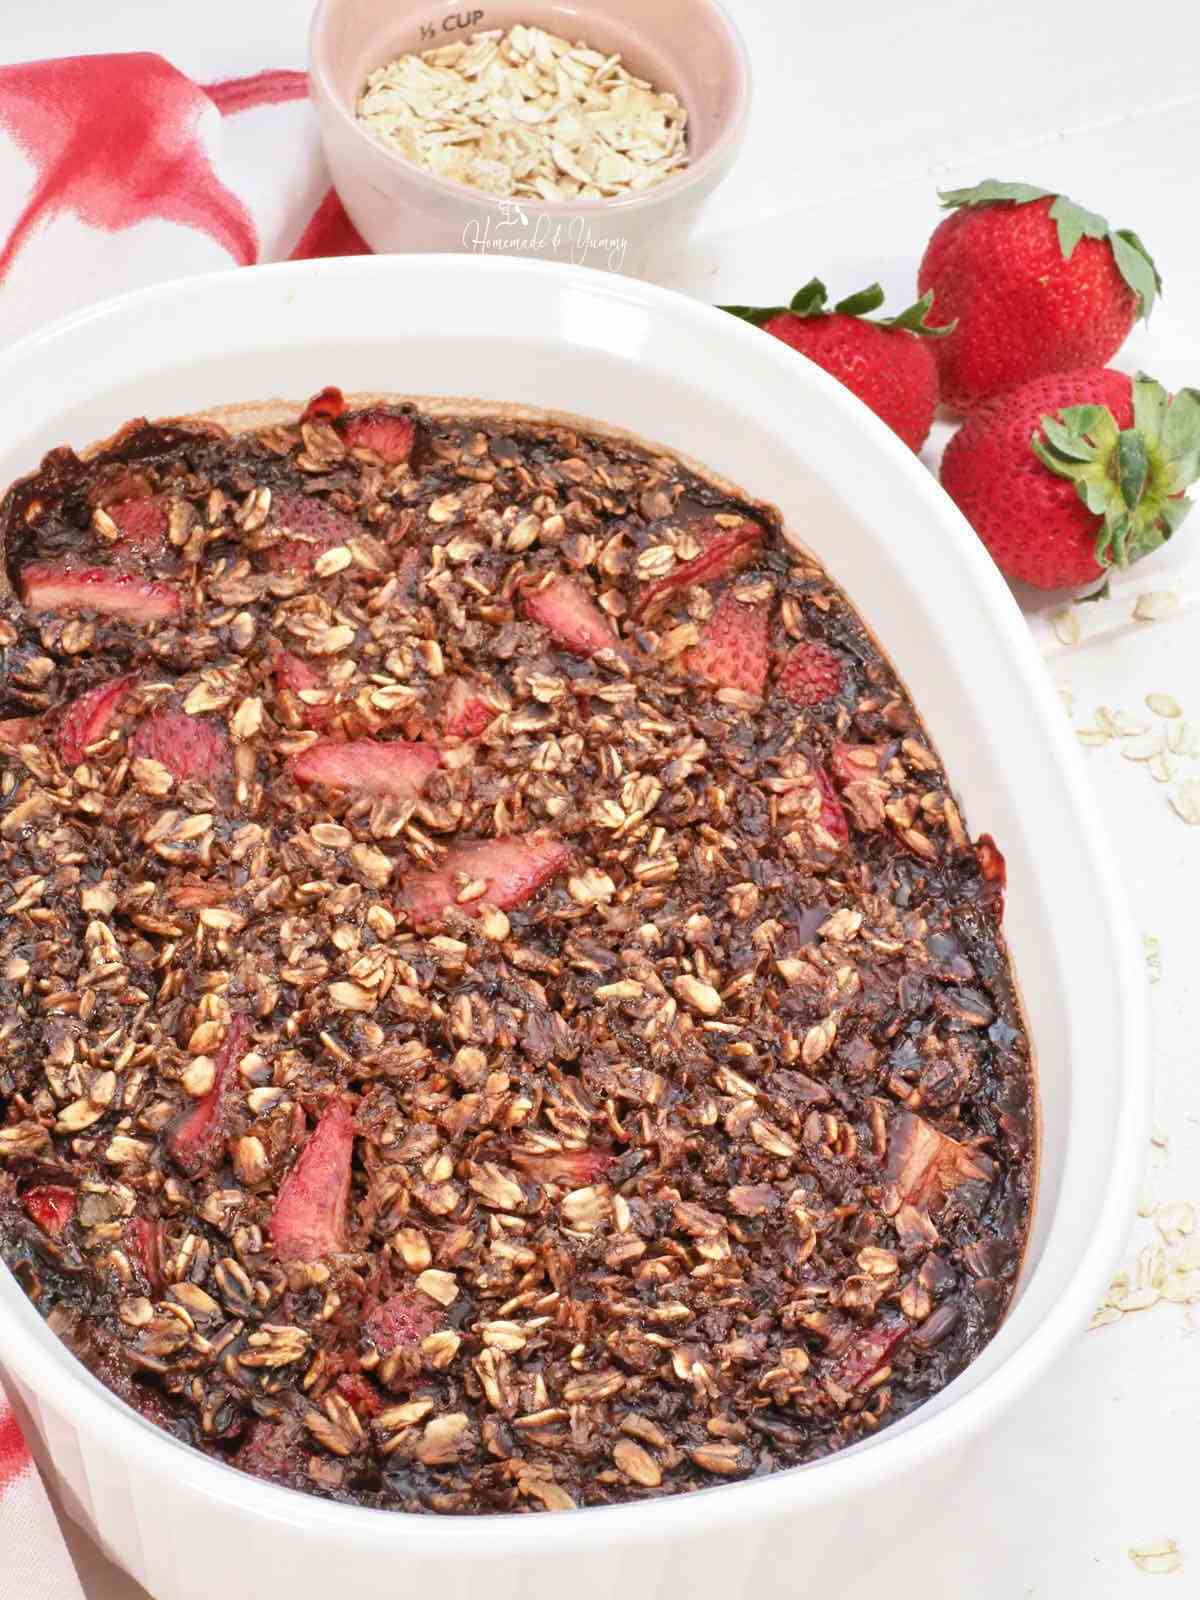 Baked Chocolate Strawberry Oatmeal casserole ready to eat.